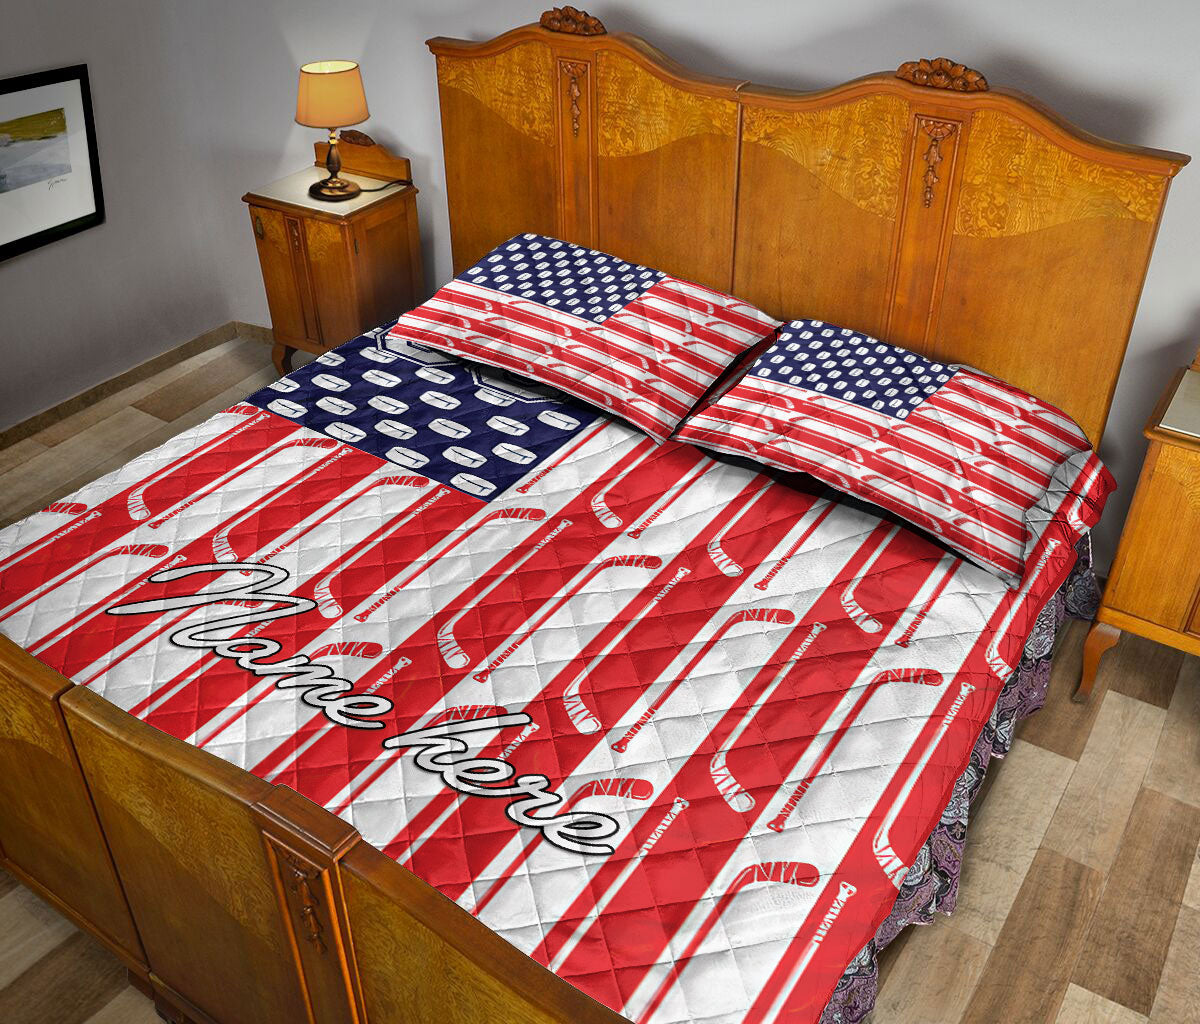 Ohaprints-Quilt-Bed-Set-Pillowcase-Hockey-Stick-Puck-Hockey-Player-America-Flag-Custom-Personalized-Name-Number-Blanket-Bedspread-Bedding-1422-Queen (80'' x 90'')